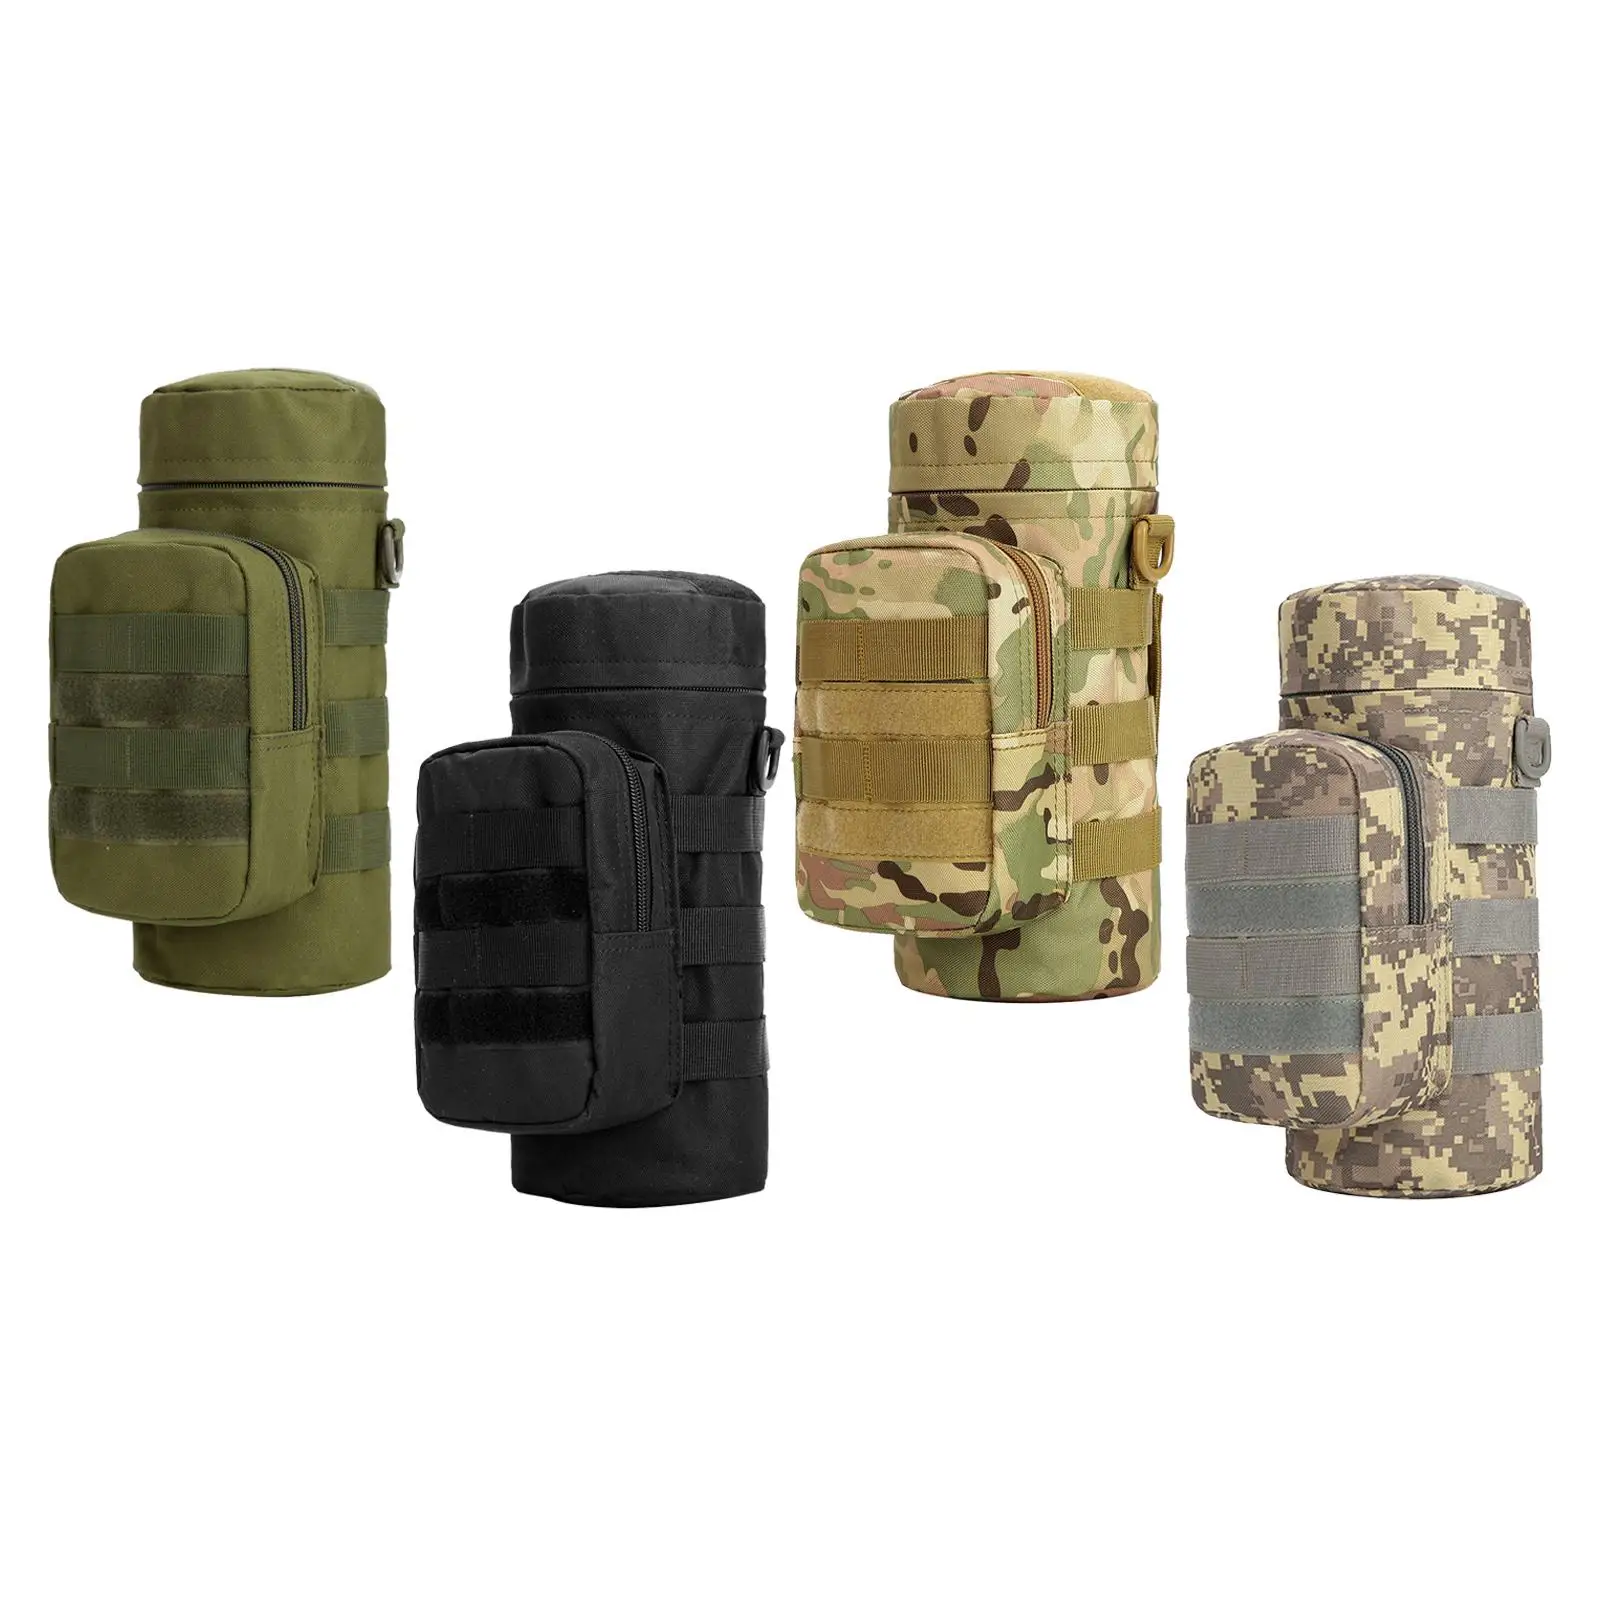 Travel Tool Kettle Set Outdoor Tactical Military Molle Water Bag For Camping Hiking Fishing Shoulder Bottle Holder Bottle Pouch